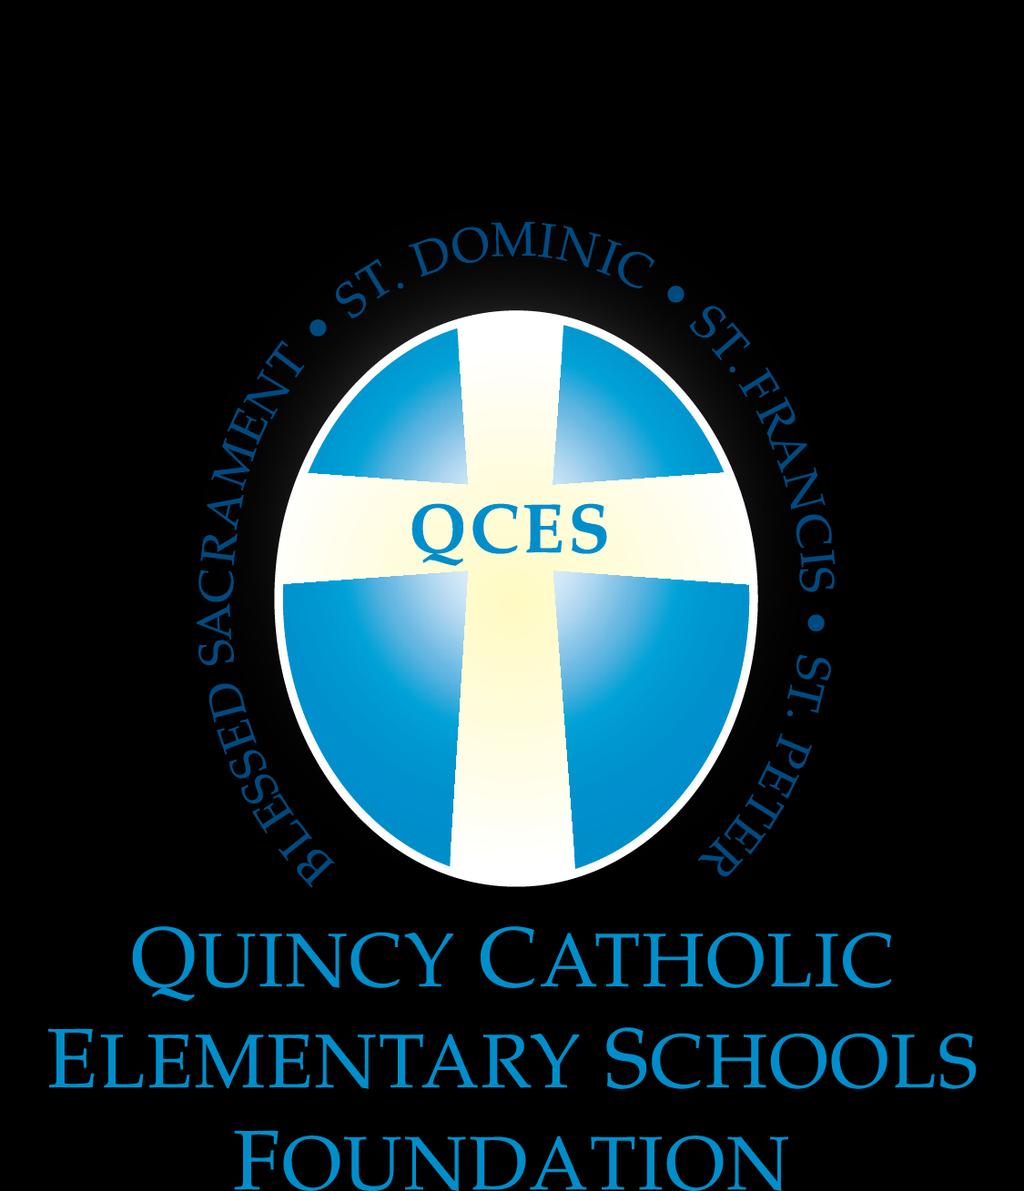 Fr. Augustus Tolton Scholarship Application Packet (February 20, 2017) Quincy Catholic Elementary